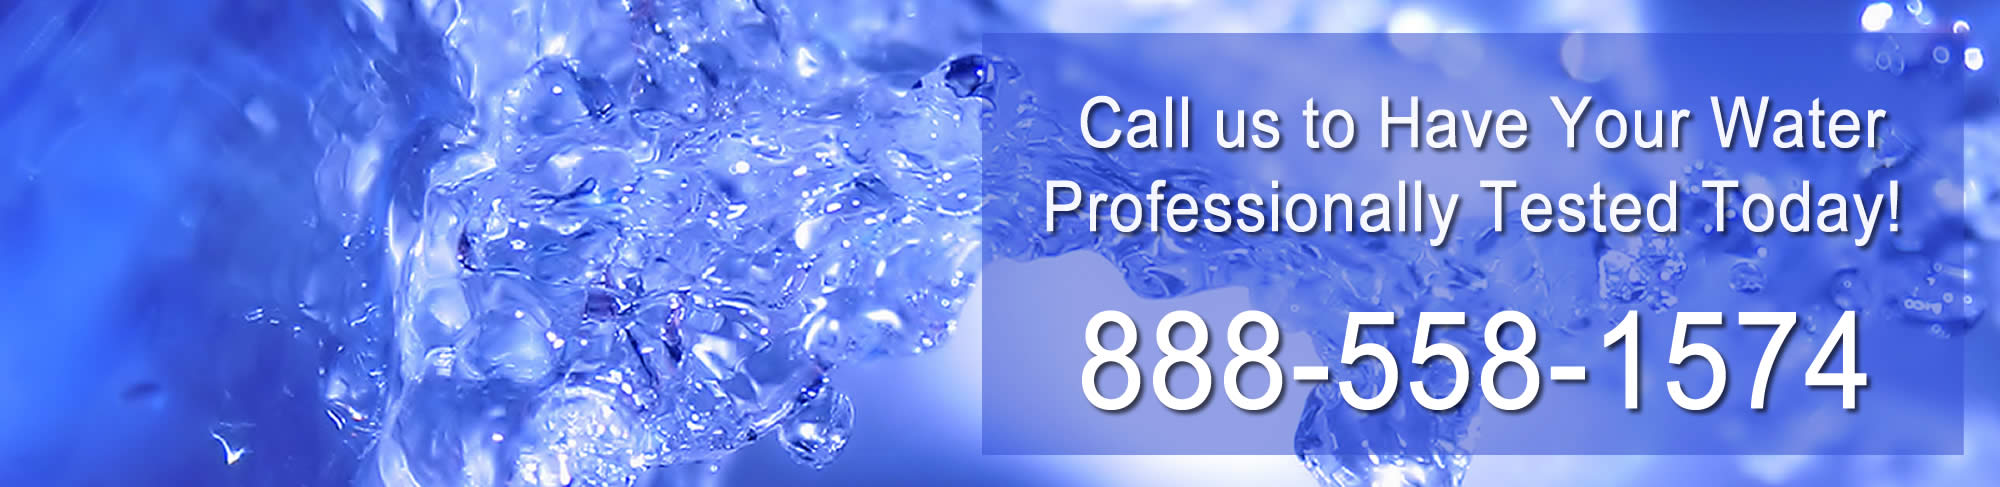 Specializing in Cobalt CT Water Testing and Analysis